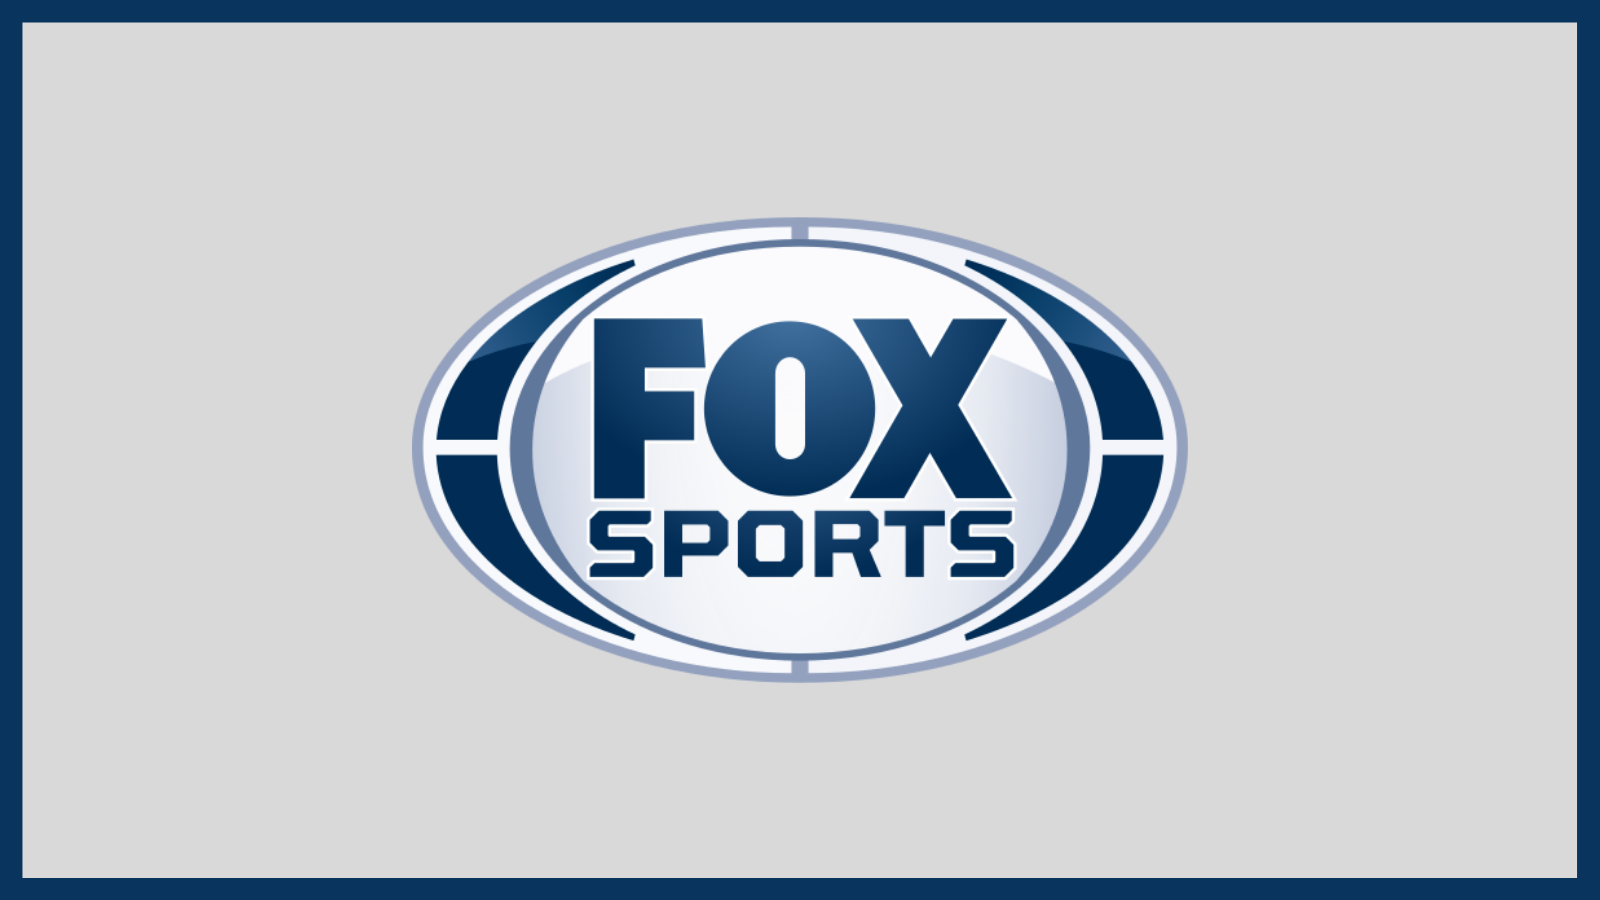 How to Watch Fox Sports Online Without Cable Get Your Game On!